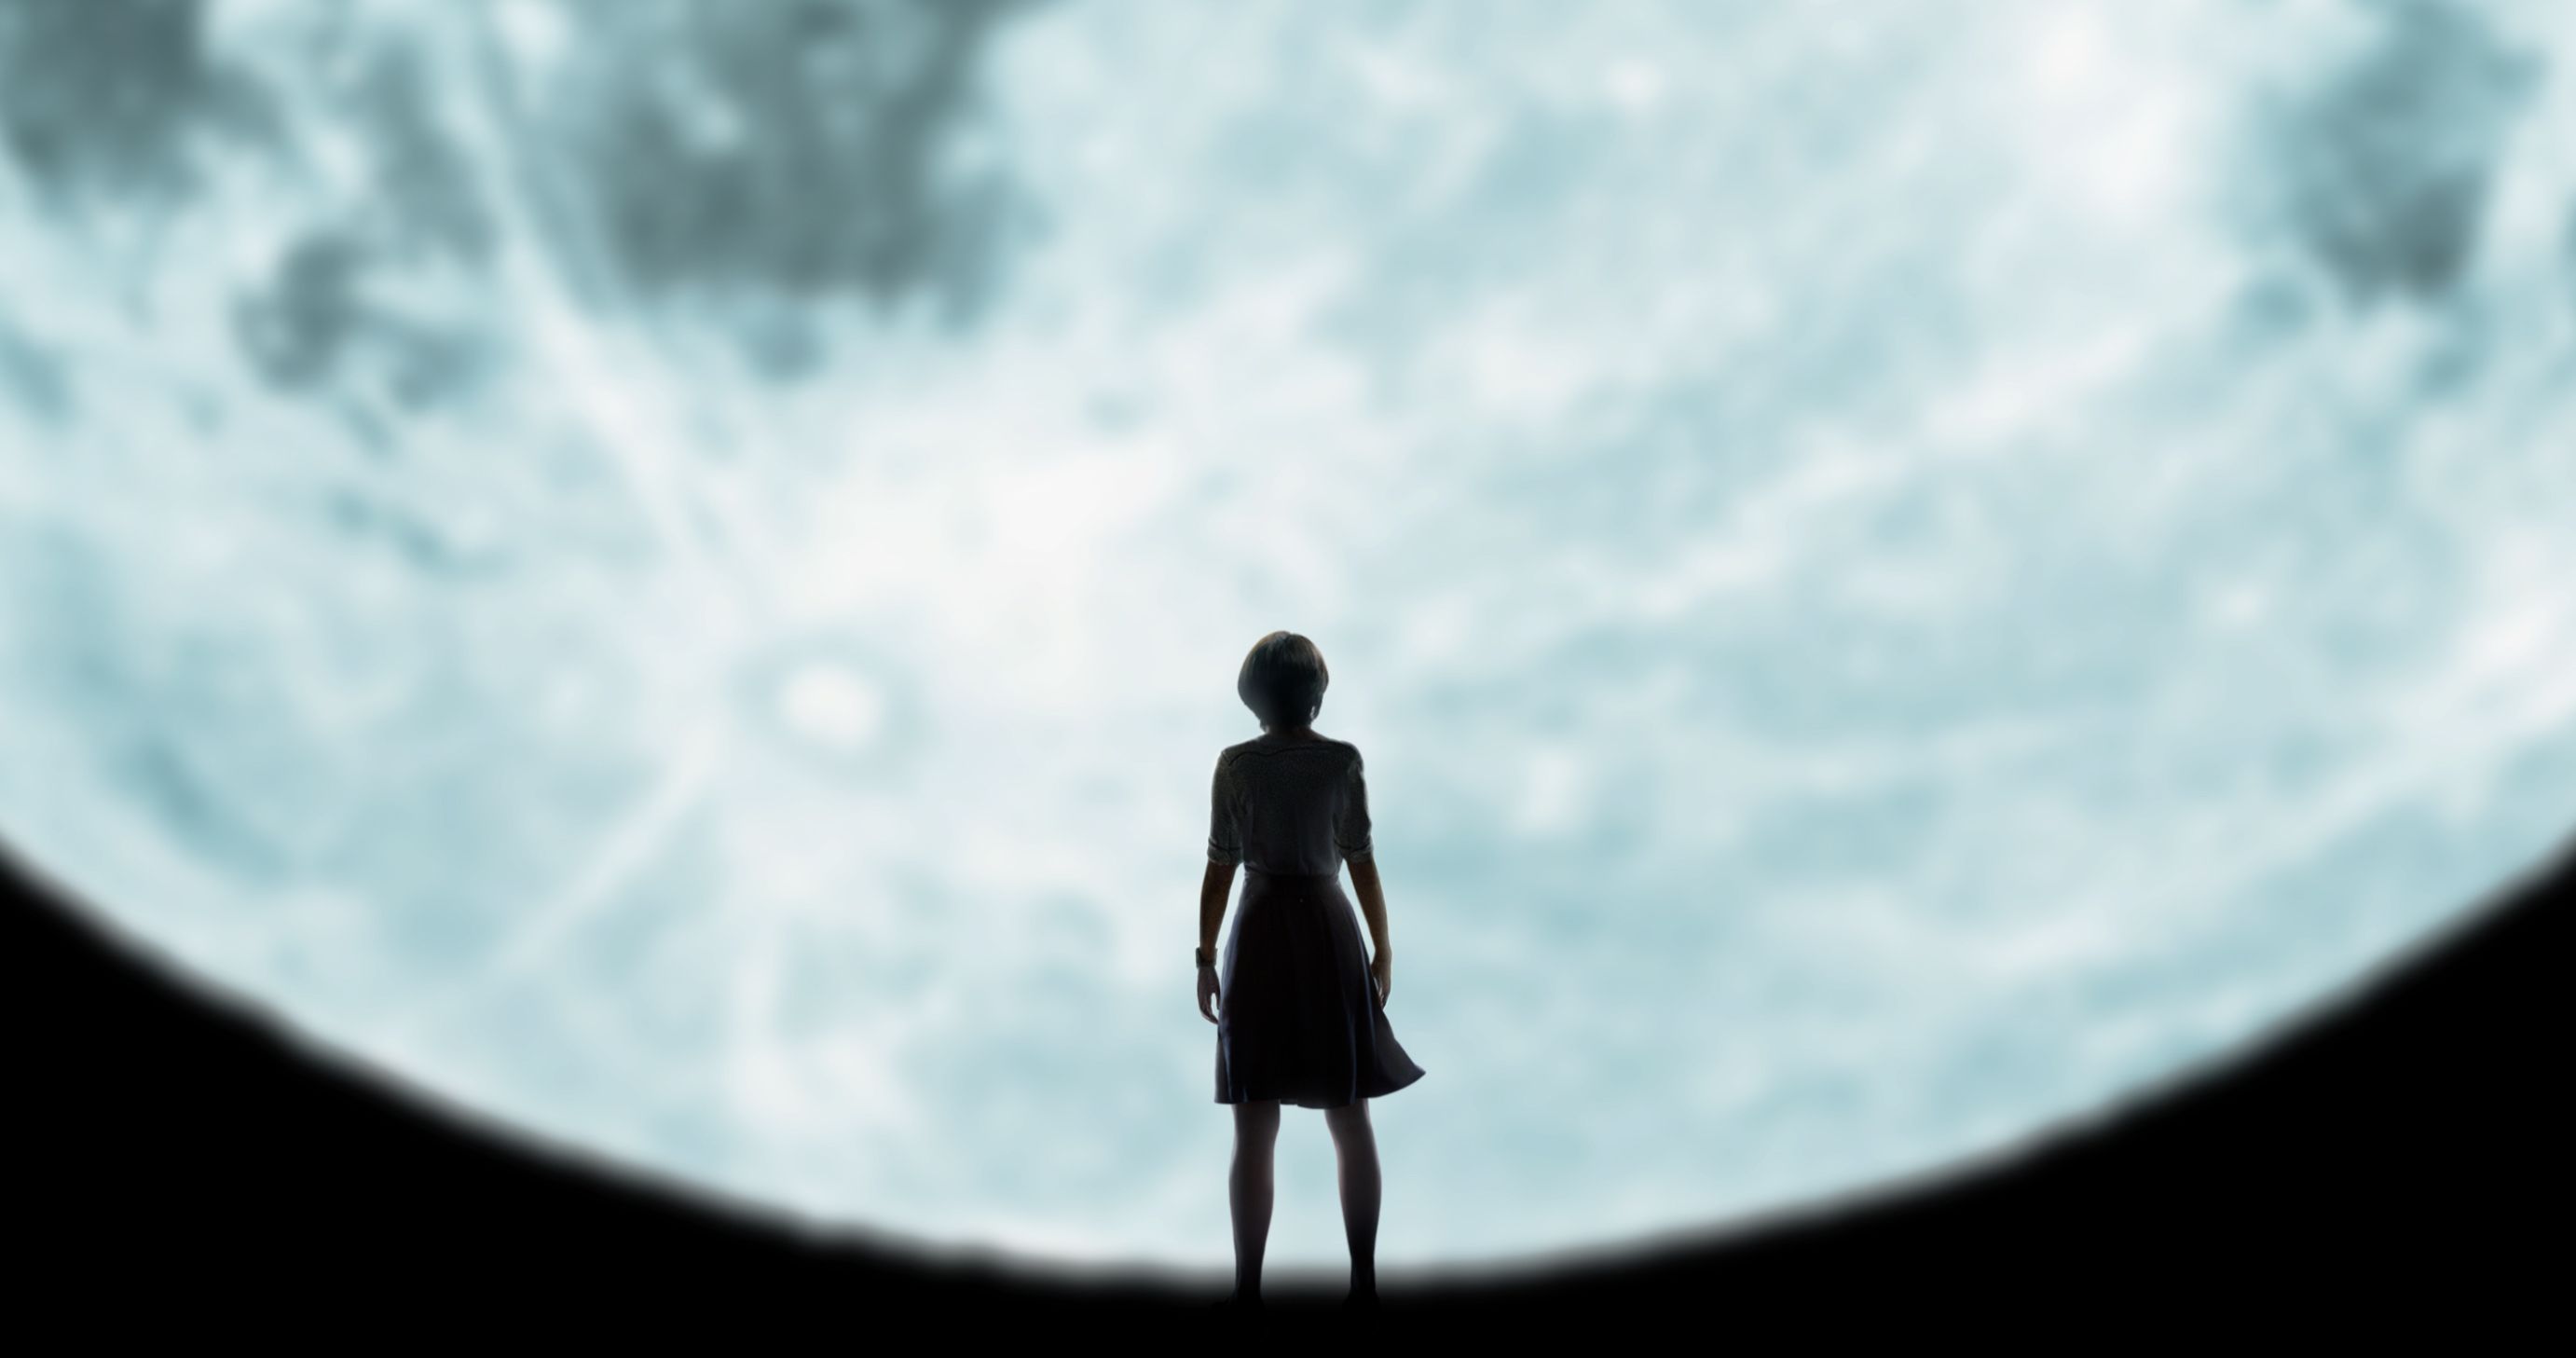 Lucy in the Sky Trailer #2: Natalie Portman Is an Unhinged Astronaut